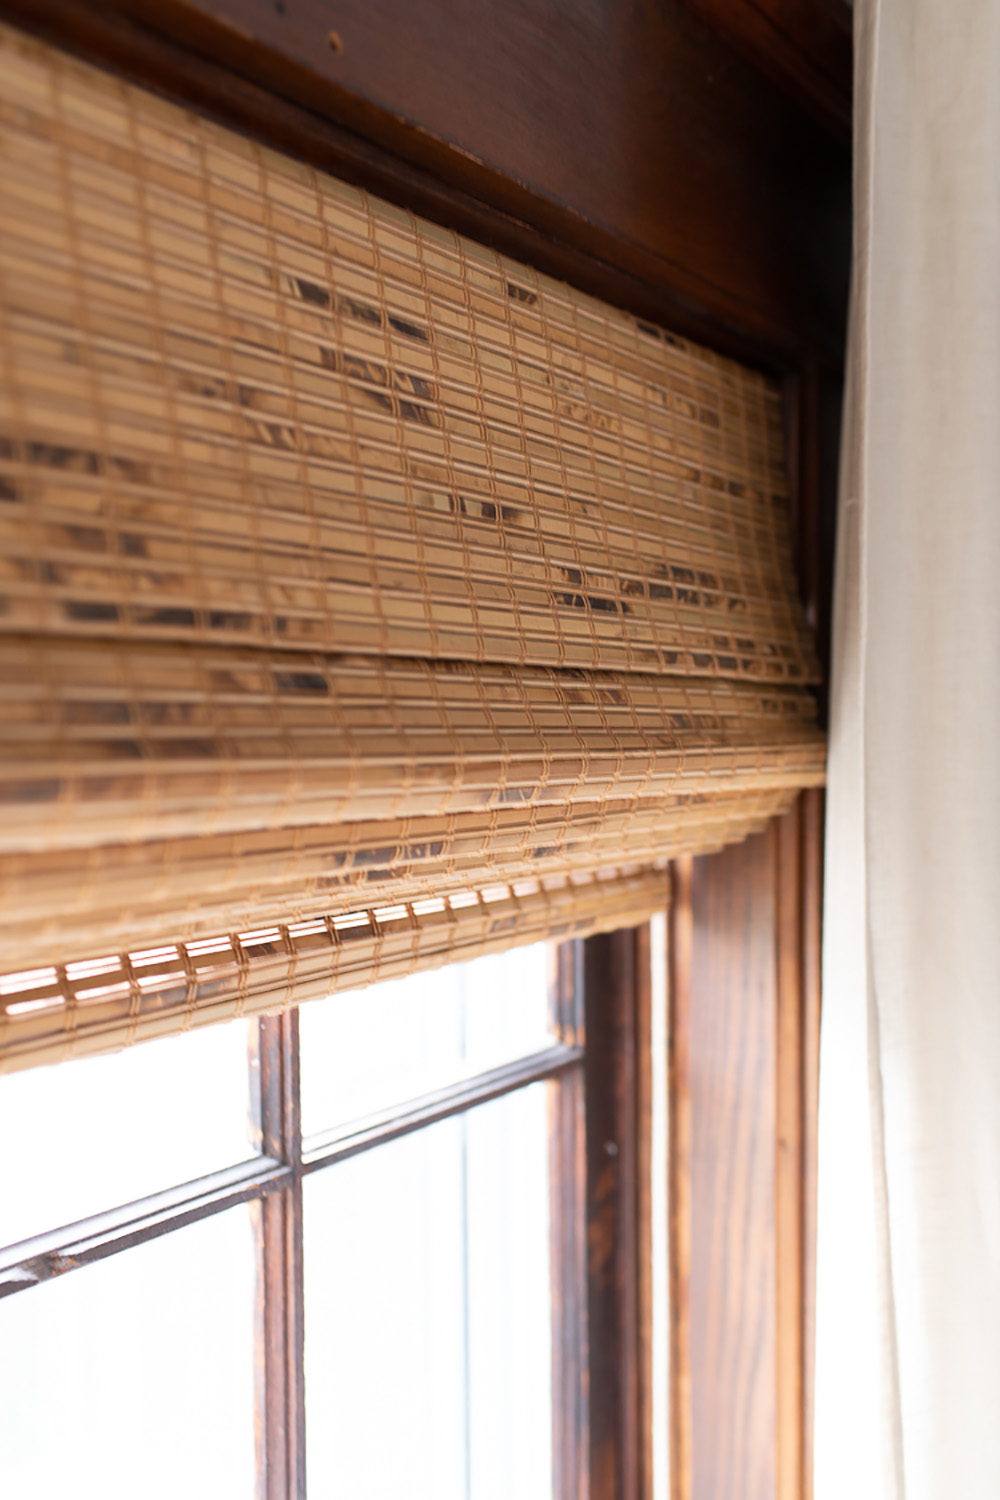 A window with horizontal natural woven roman shades.